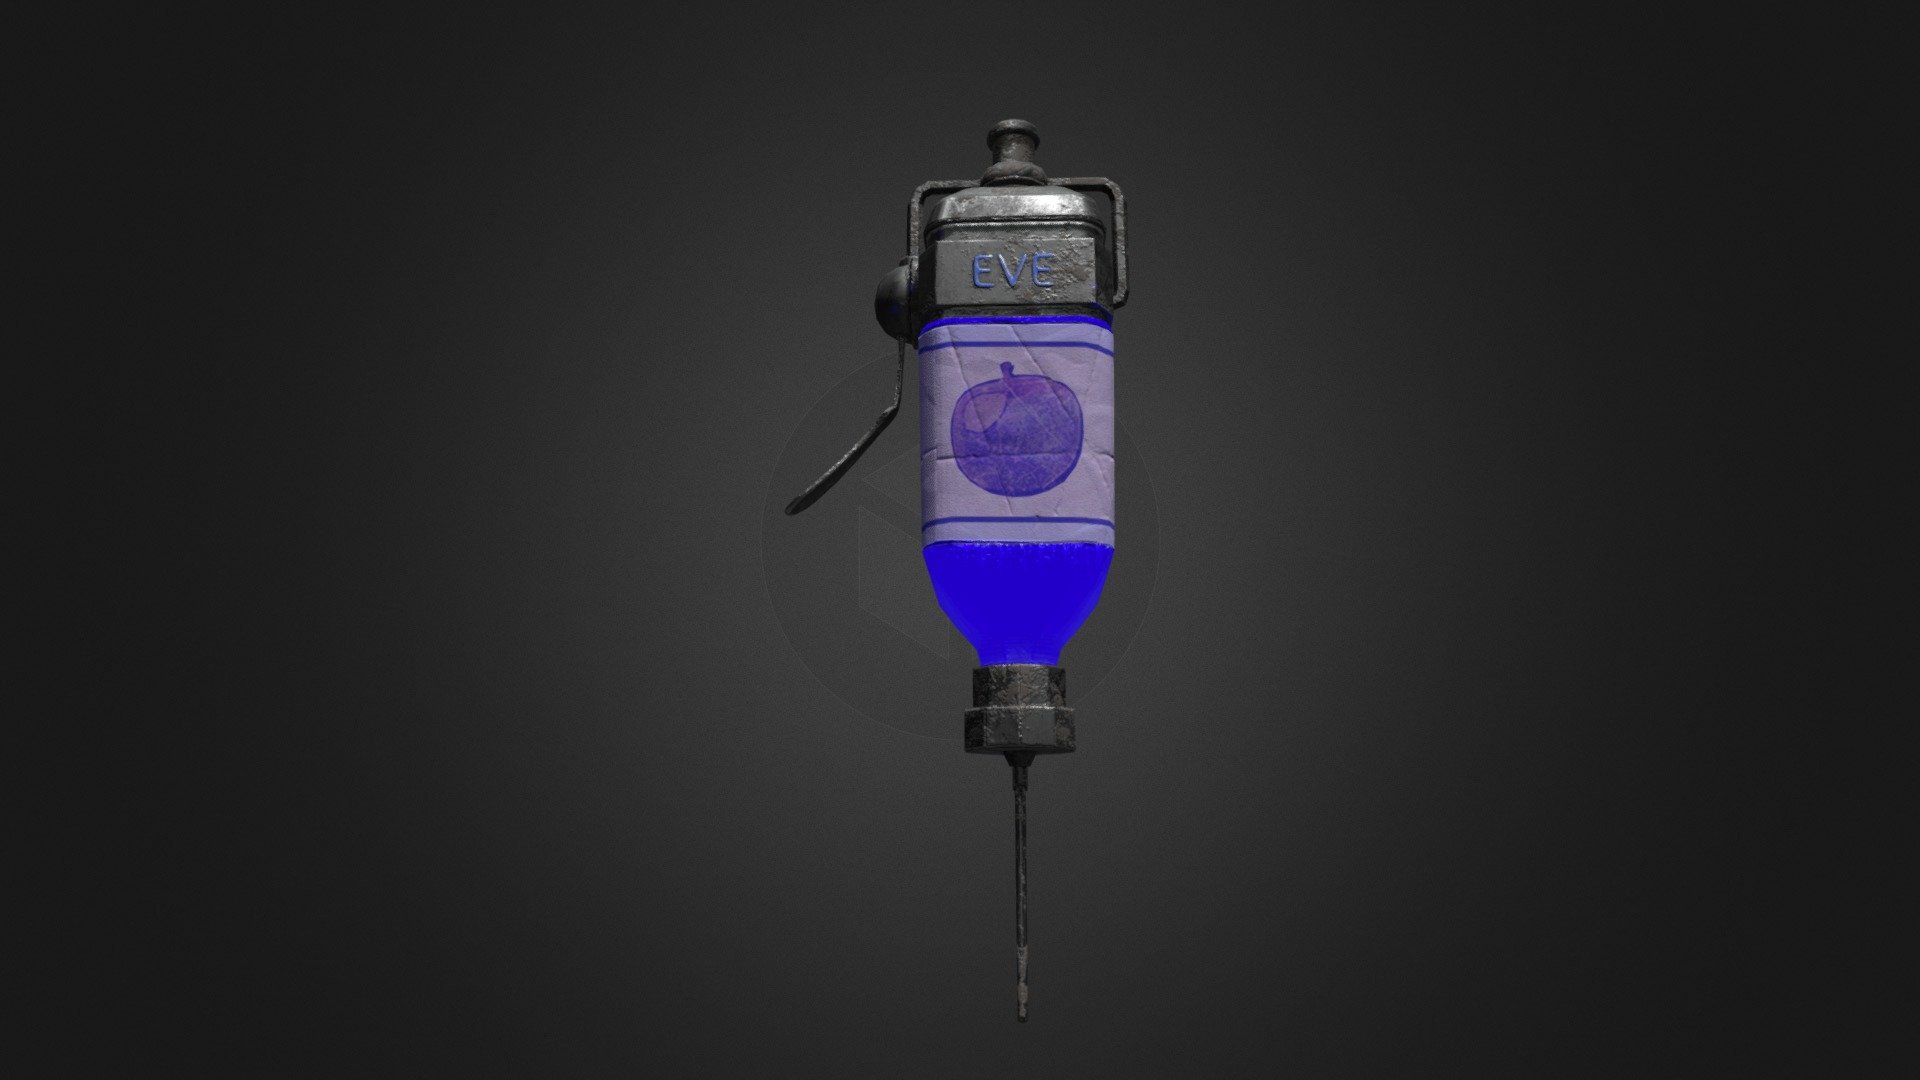 Created in Maya and Zbrush - Textured with Substance Painter

Made with 2048 maps and this would be held in hand in first person briefly so needs to be decent quality

1554 Tris / 812 Polys - Bioshock Fan Art - Eve Hypo Syringe - 3D model by SimonJEdwards3D 3d model